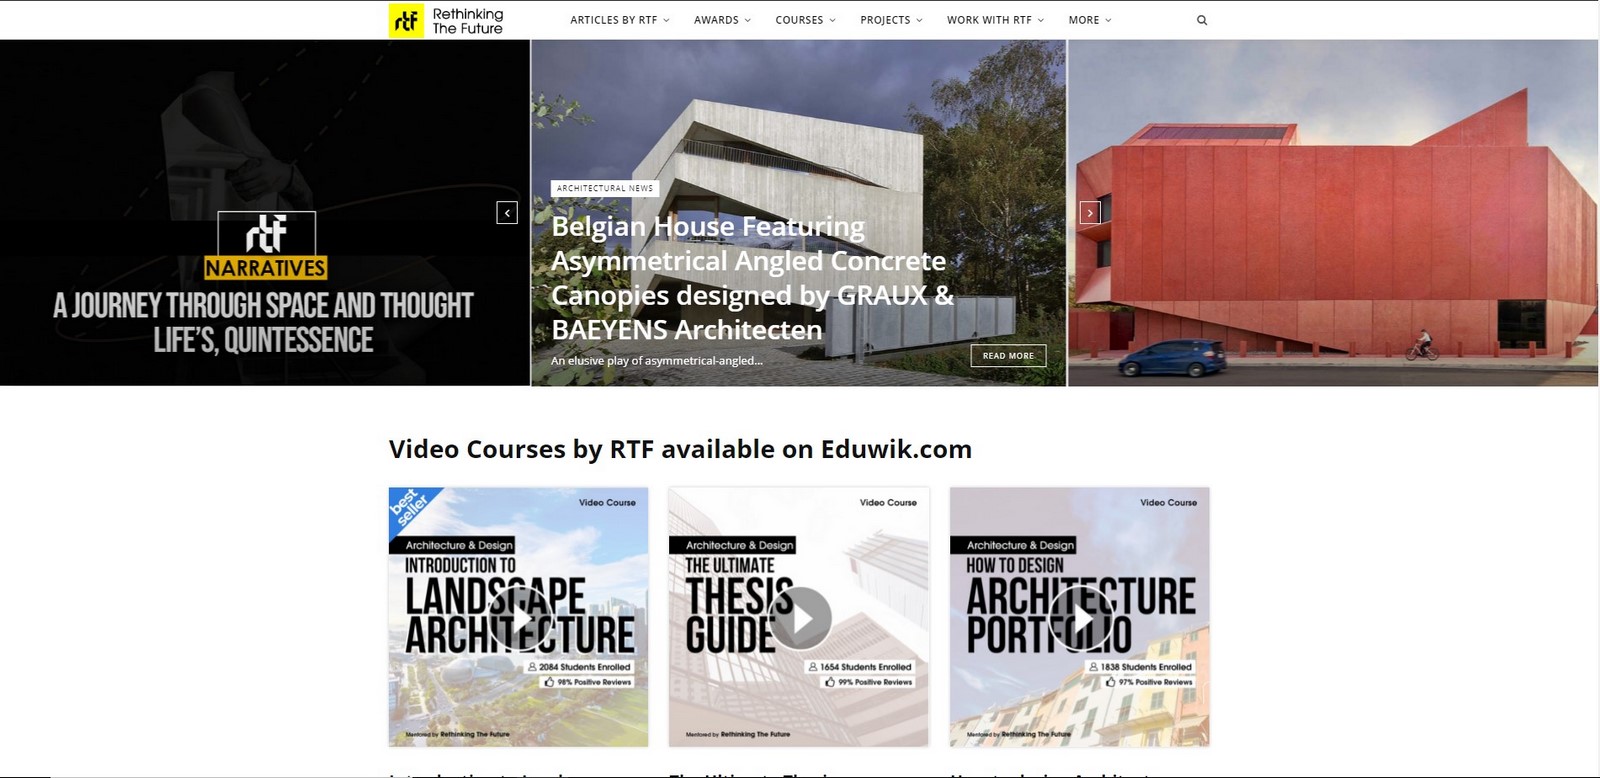 12 Websites That Can Aid Architectural Thesis Research - Sheet11